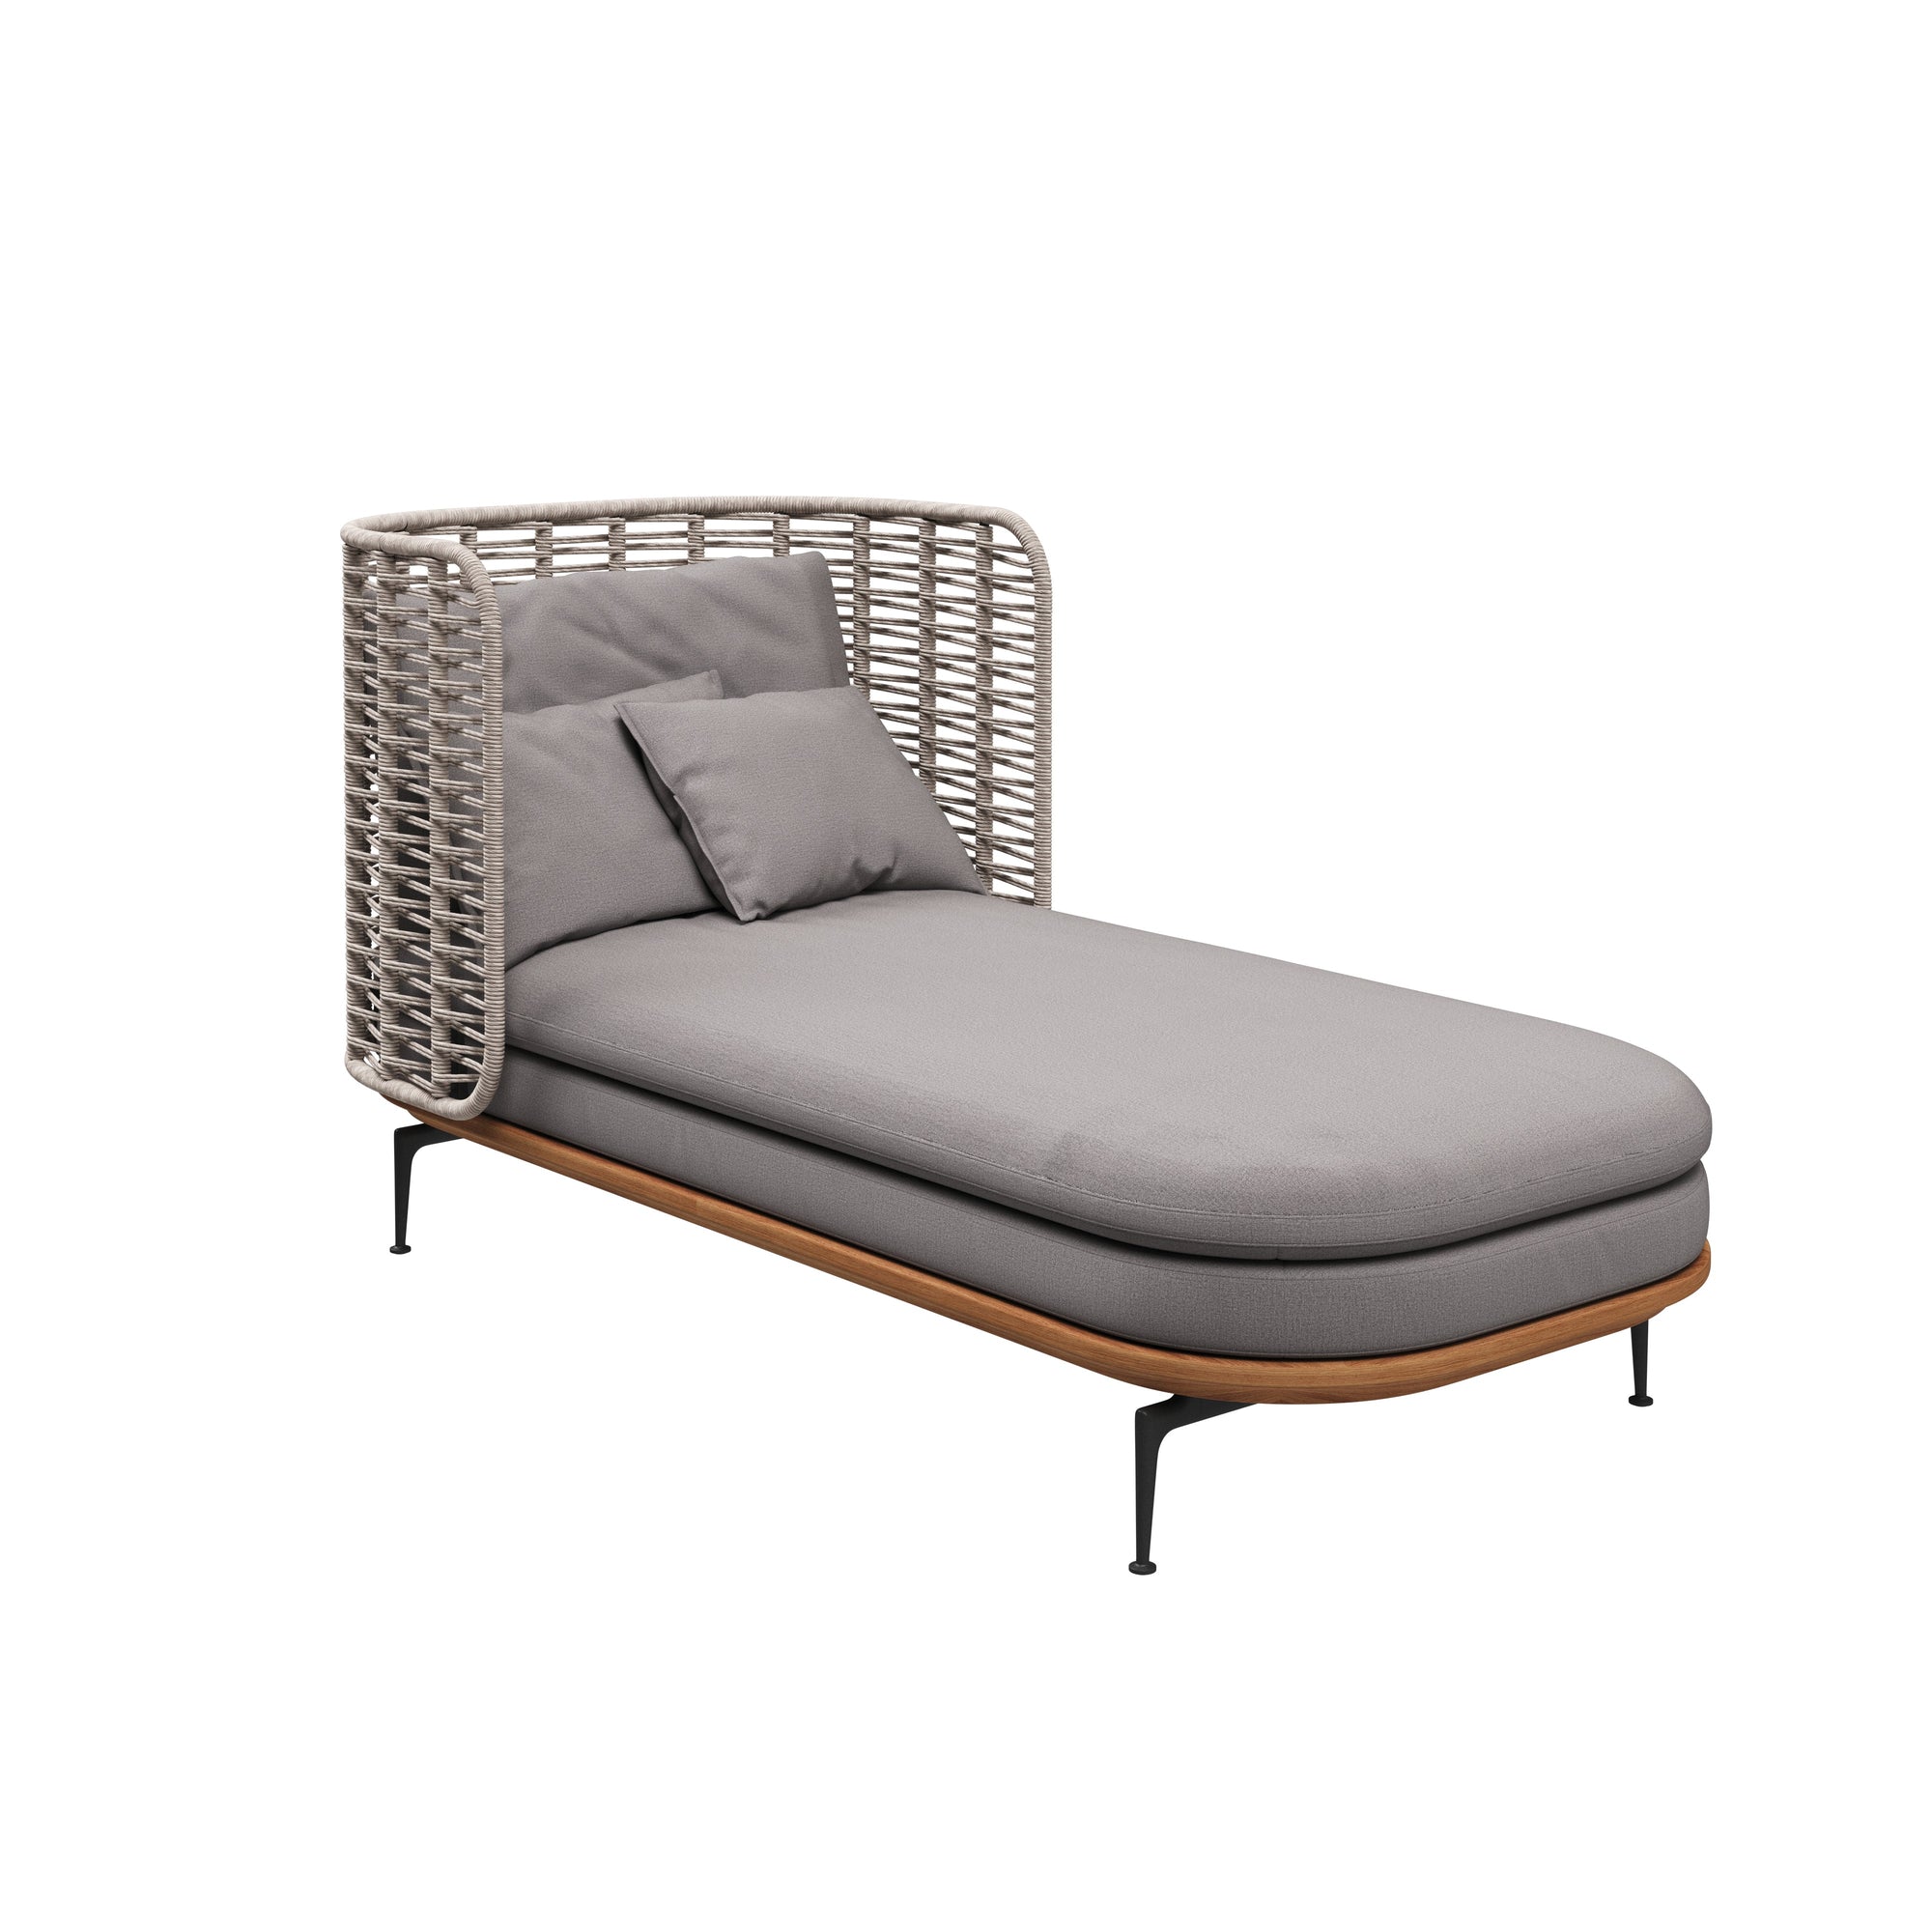 Mistral High Back Daybed-Gloster-Contract Furniture Store